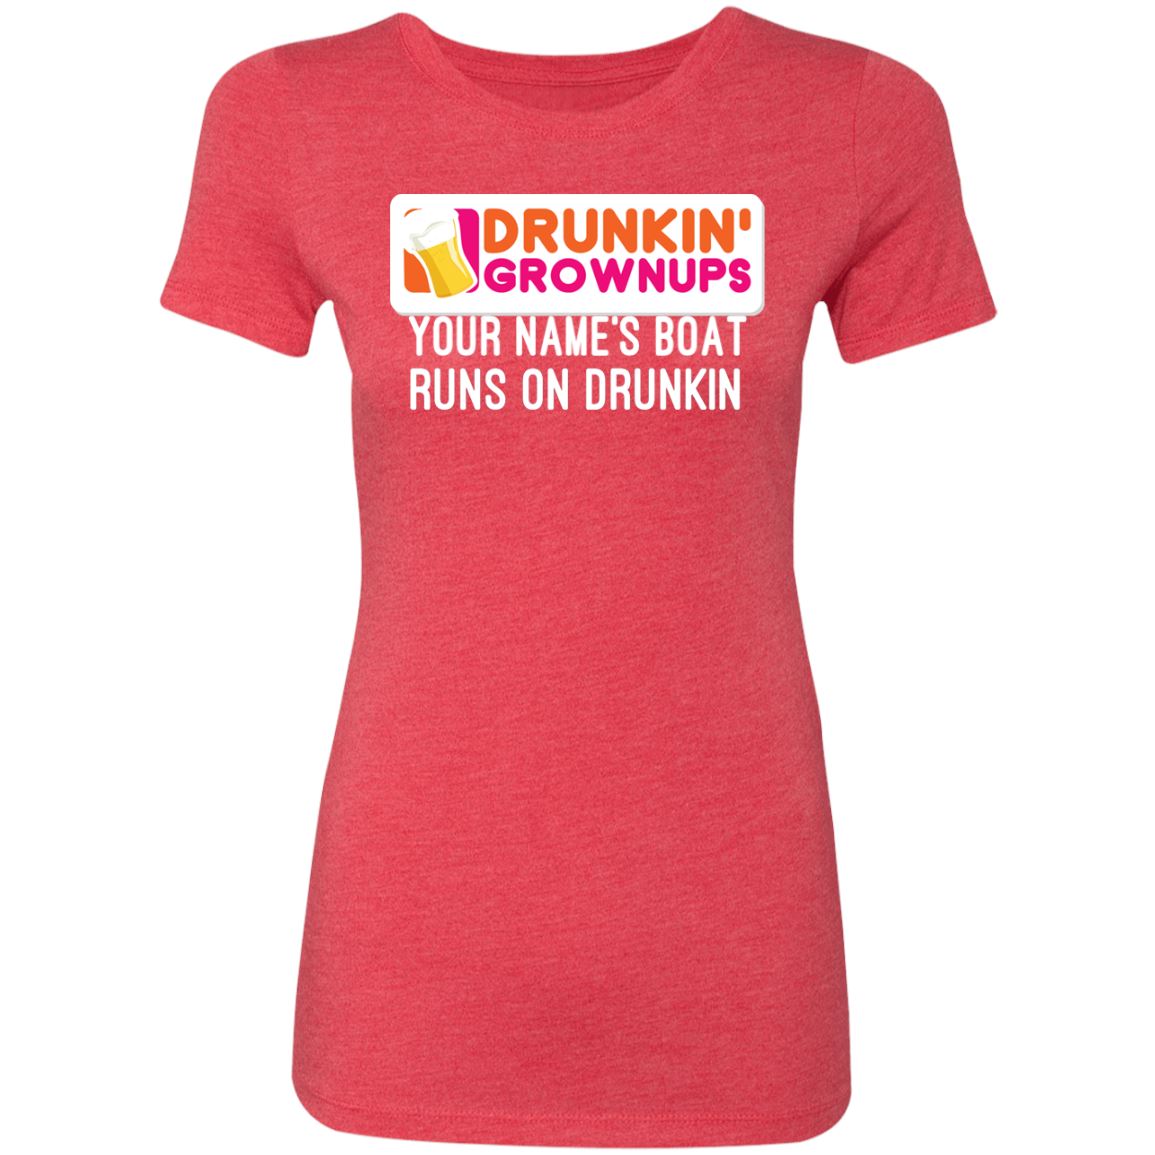 Drunkin Grownups PERSONALIZED Men's and Women's T-Shirts Apparel NL6710 Ladies' Triblend T-Shirt Vintage Red S